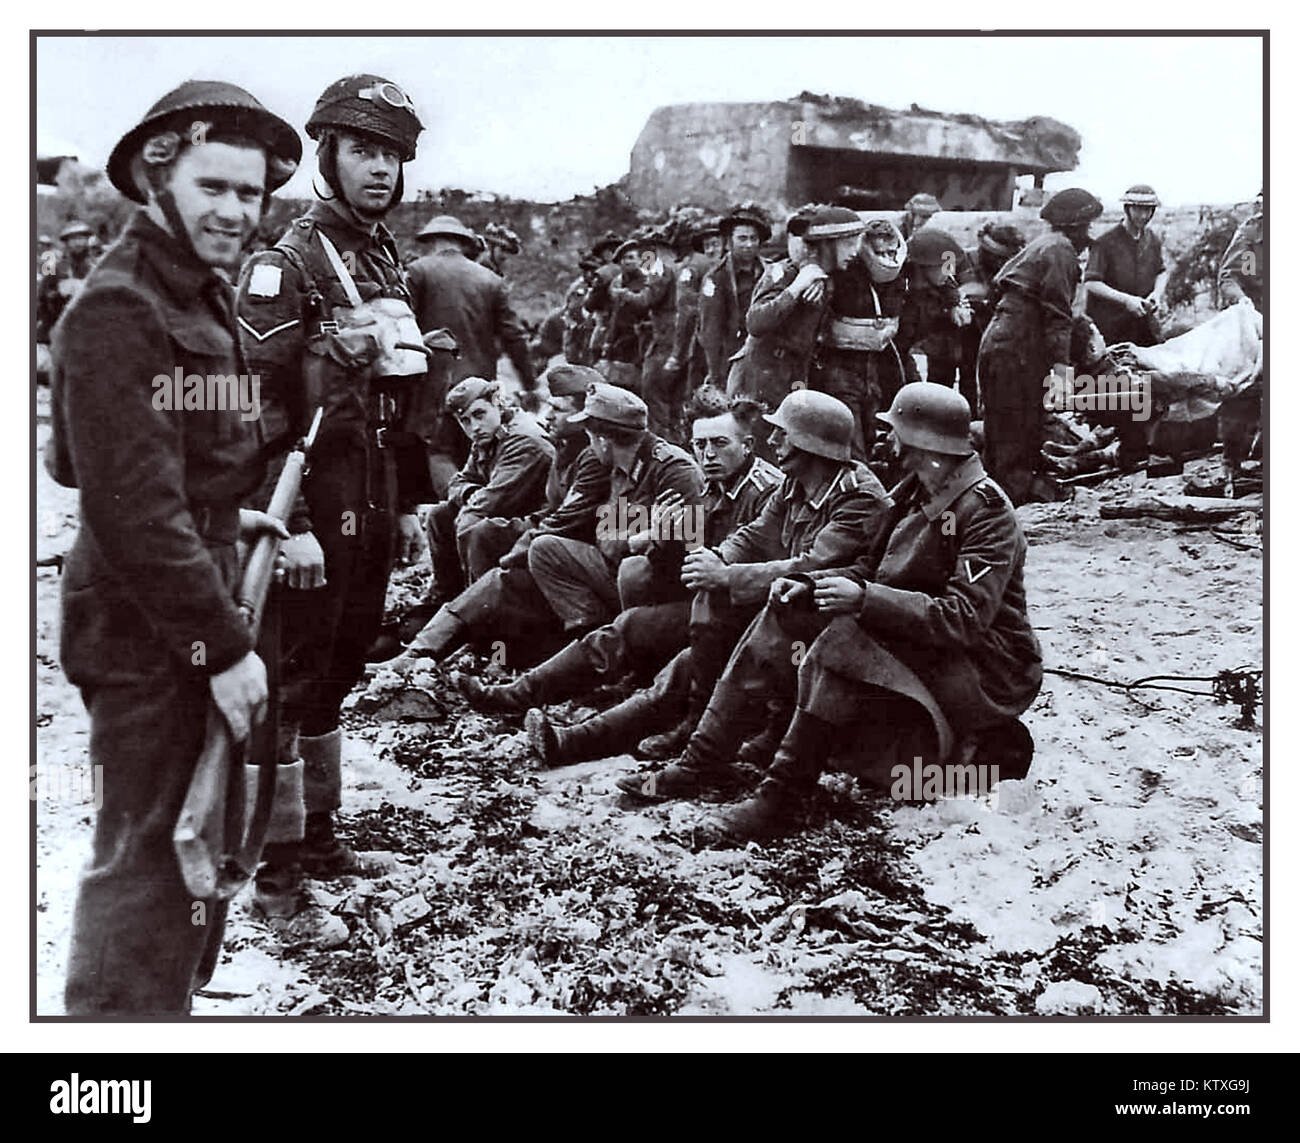 D-DAY 6th June 1944  WW2 Normandy German Prisoners. British 5th Battalion Royal Berkshire Regiment on Juno Beach Normandy, guarding surrendered German POW's Prisoners of War with walking wounded in background Stock Photo